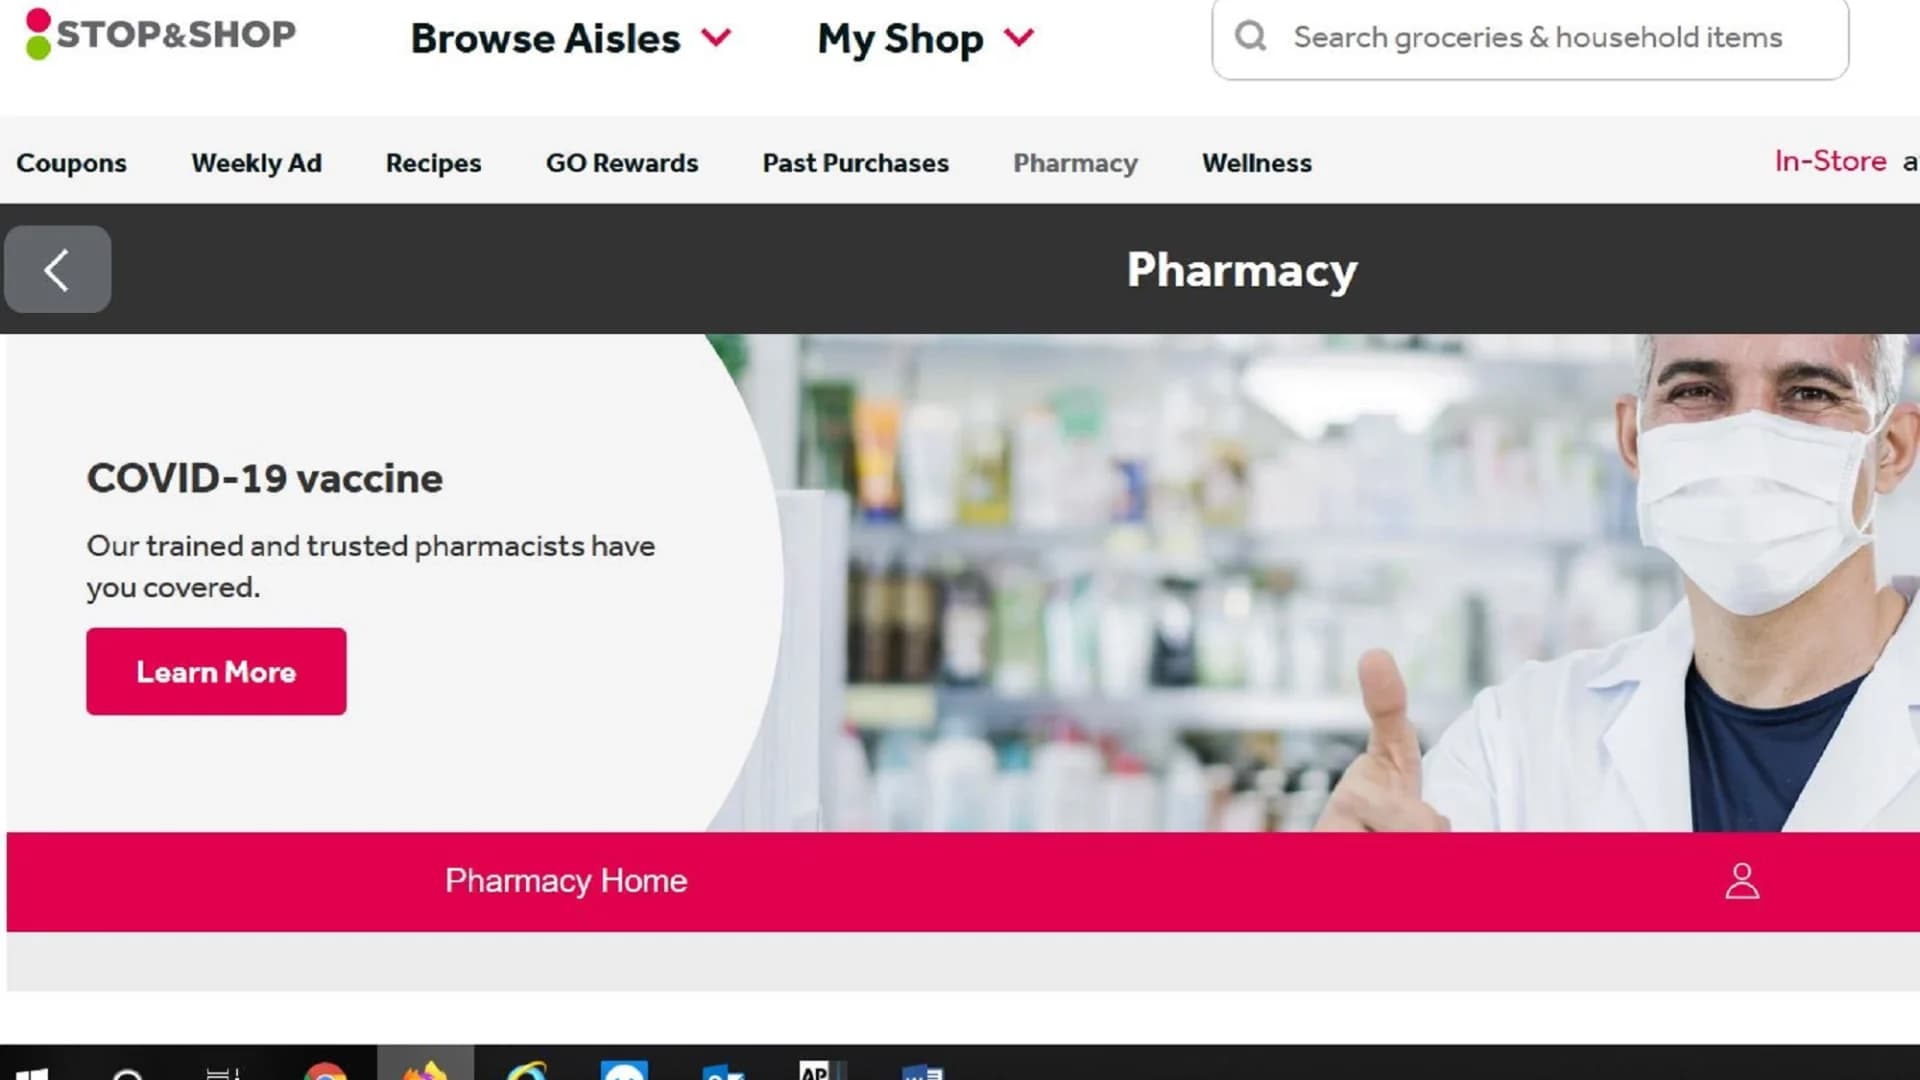 New York-area Stop & Shop pharmacies approved to administer COVID-19 vaccines 